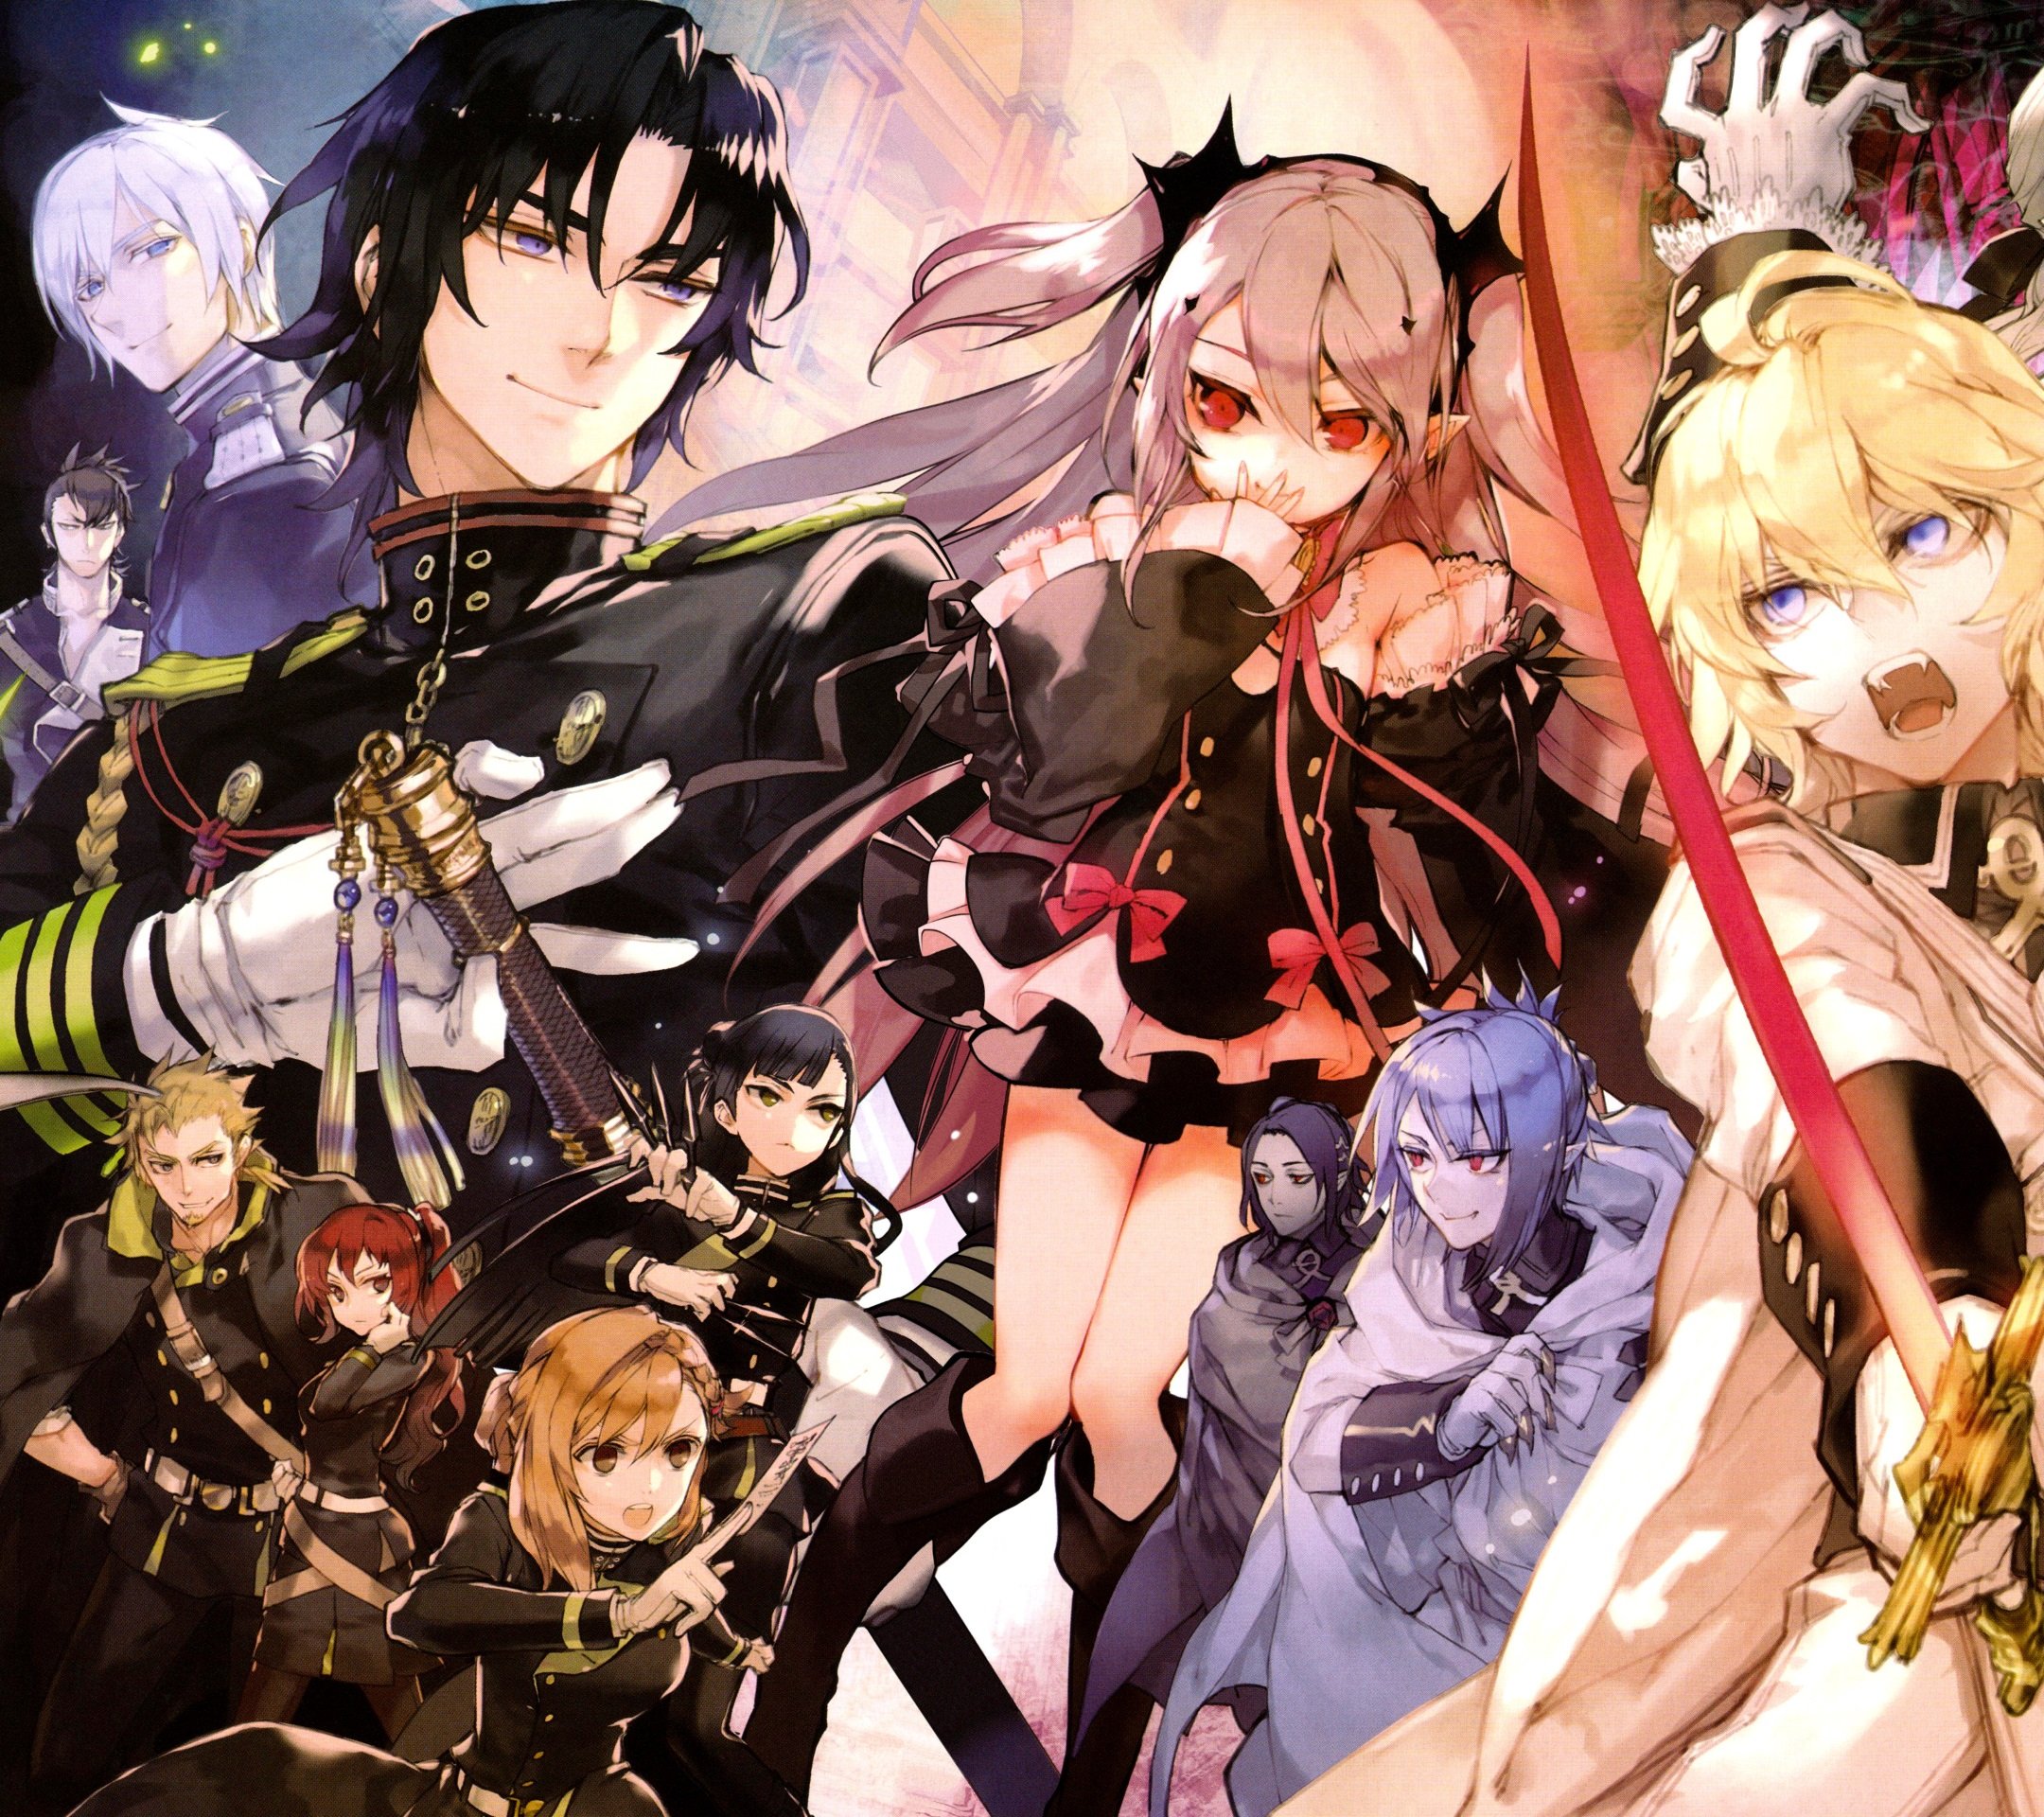 Owari no seraph seraph of the end anime wallpapers for iphone and android smartphones